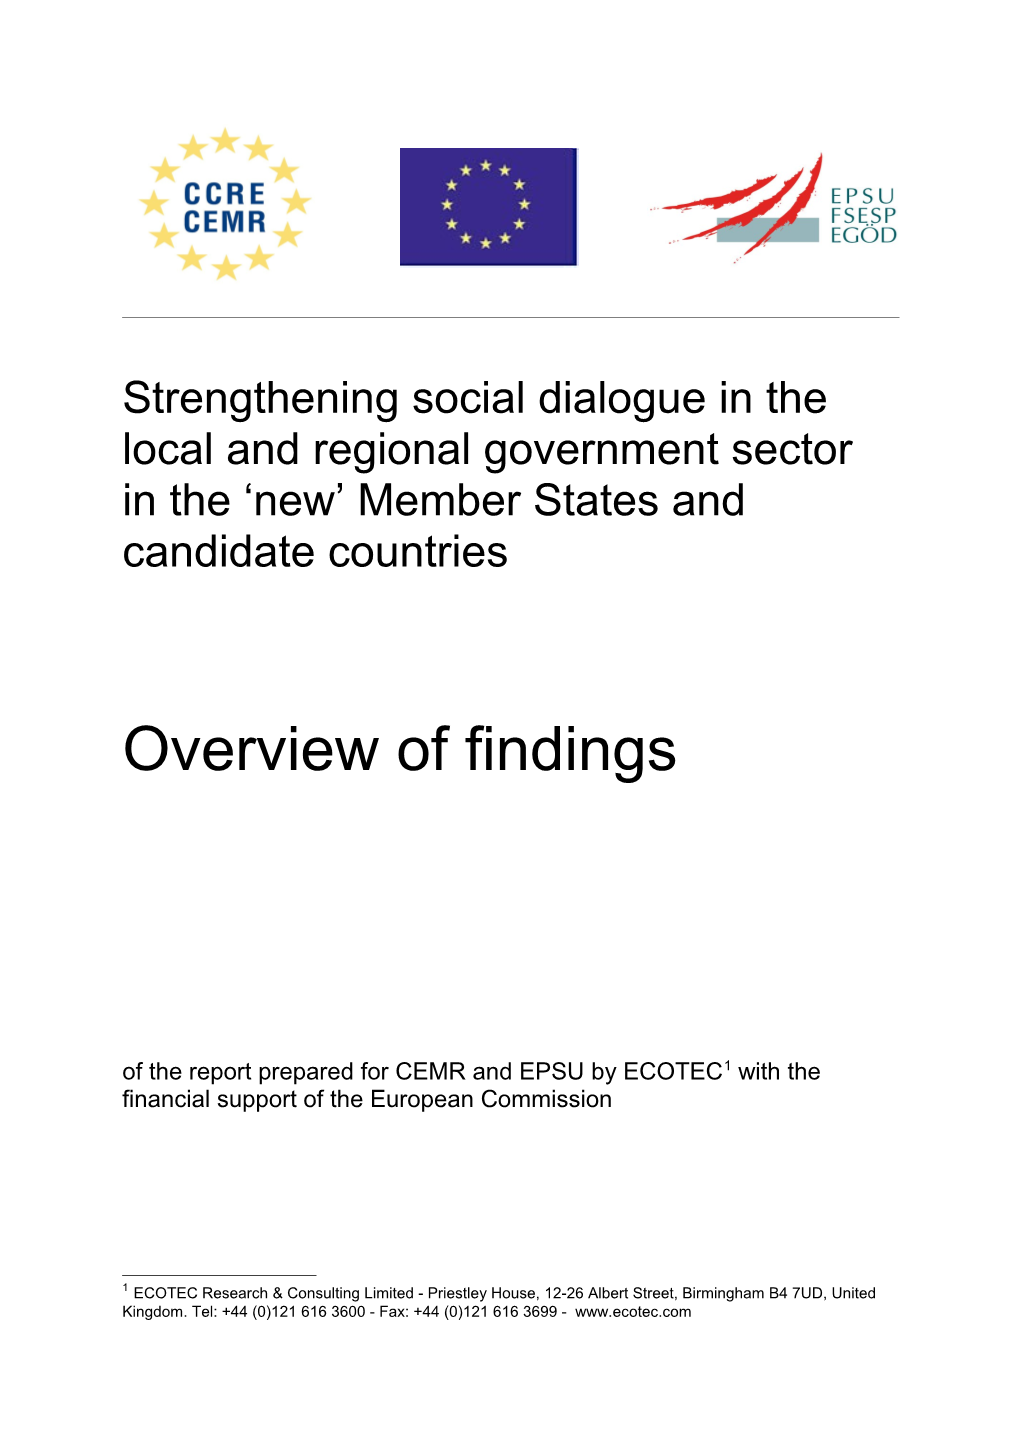 Strengthening Social Dialogue in the Local and Regional Government Sector in the New Member